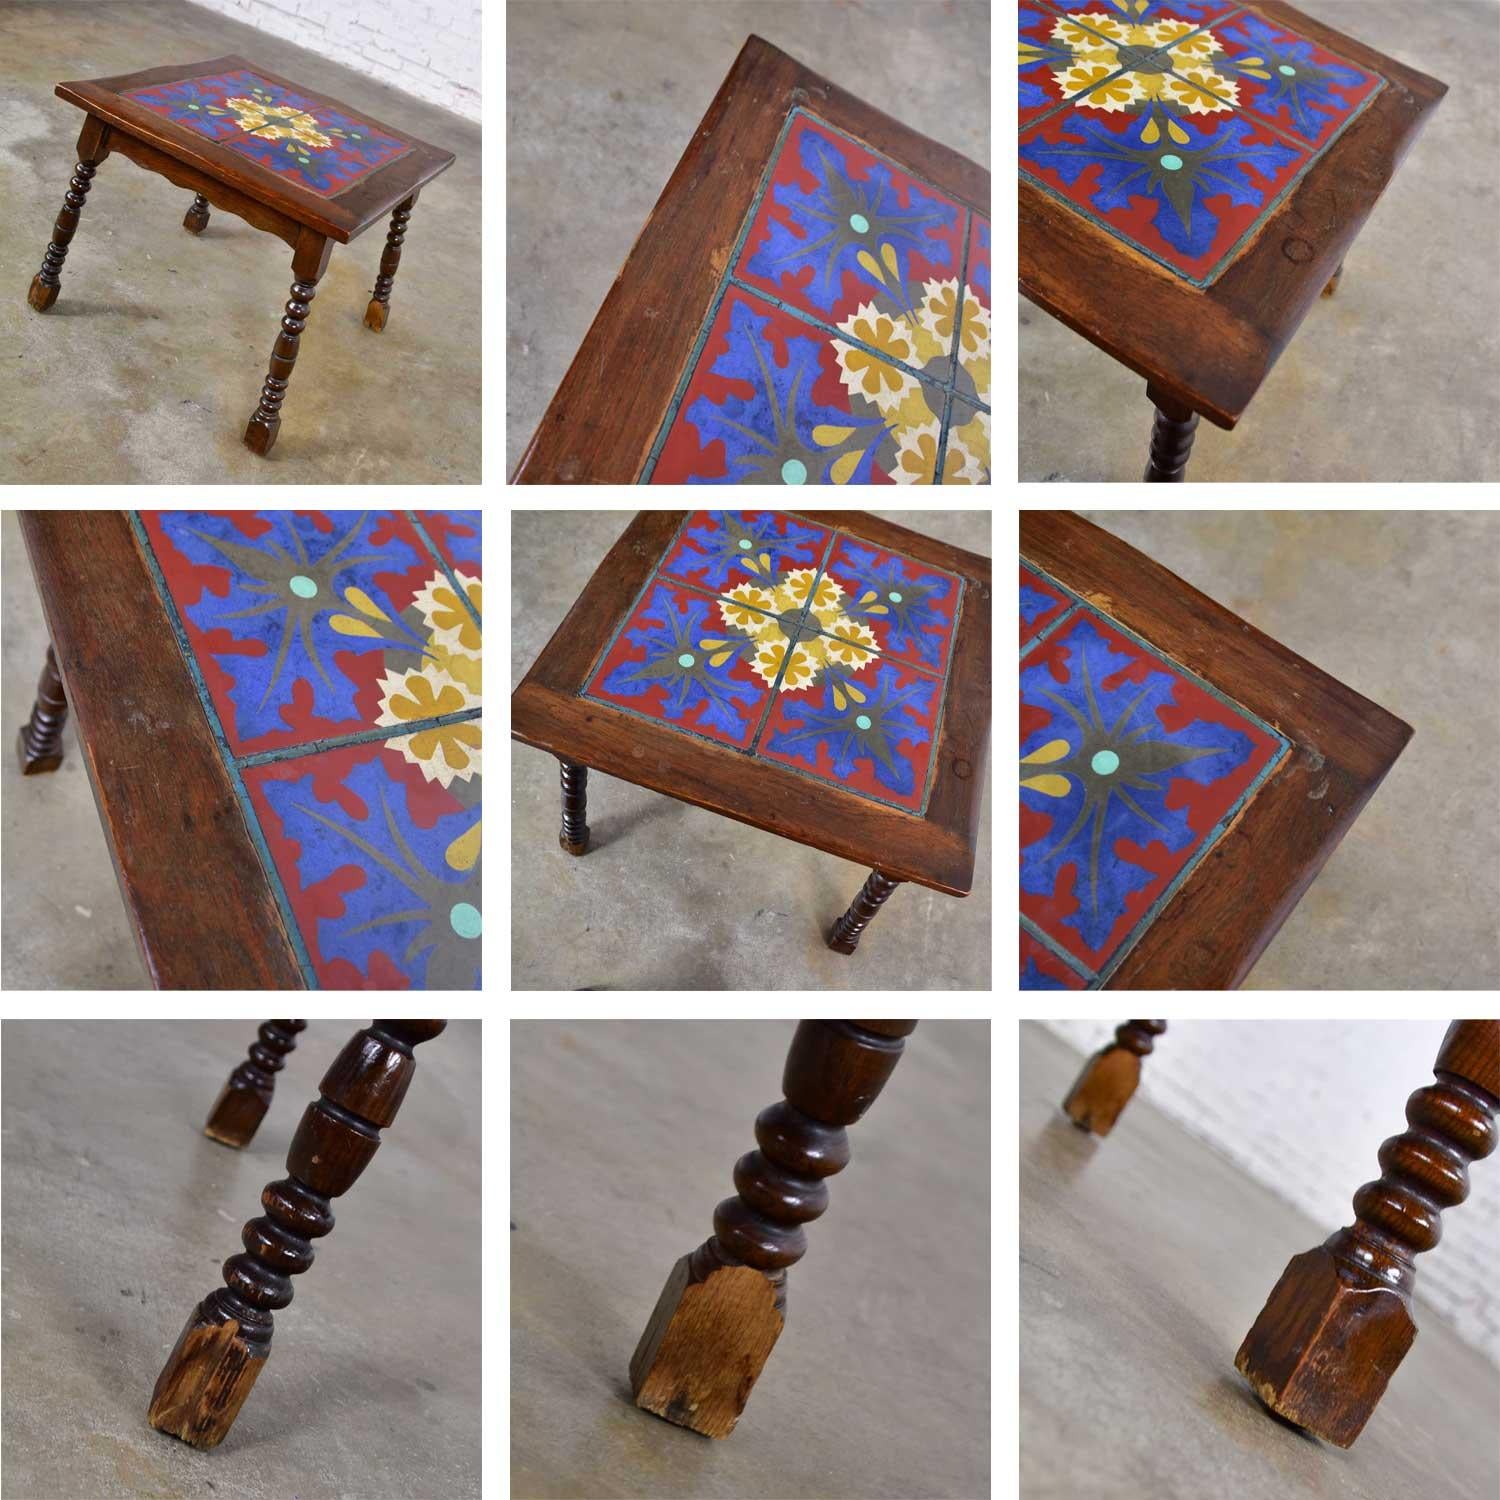 Table d'appoint Catalina California ou Mission Arts & Craft Style Spanish Tile Top en vente 4